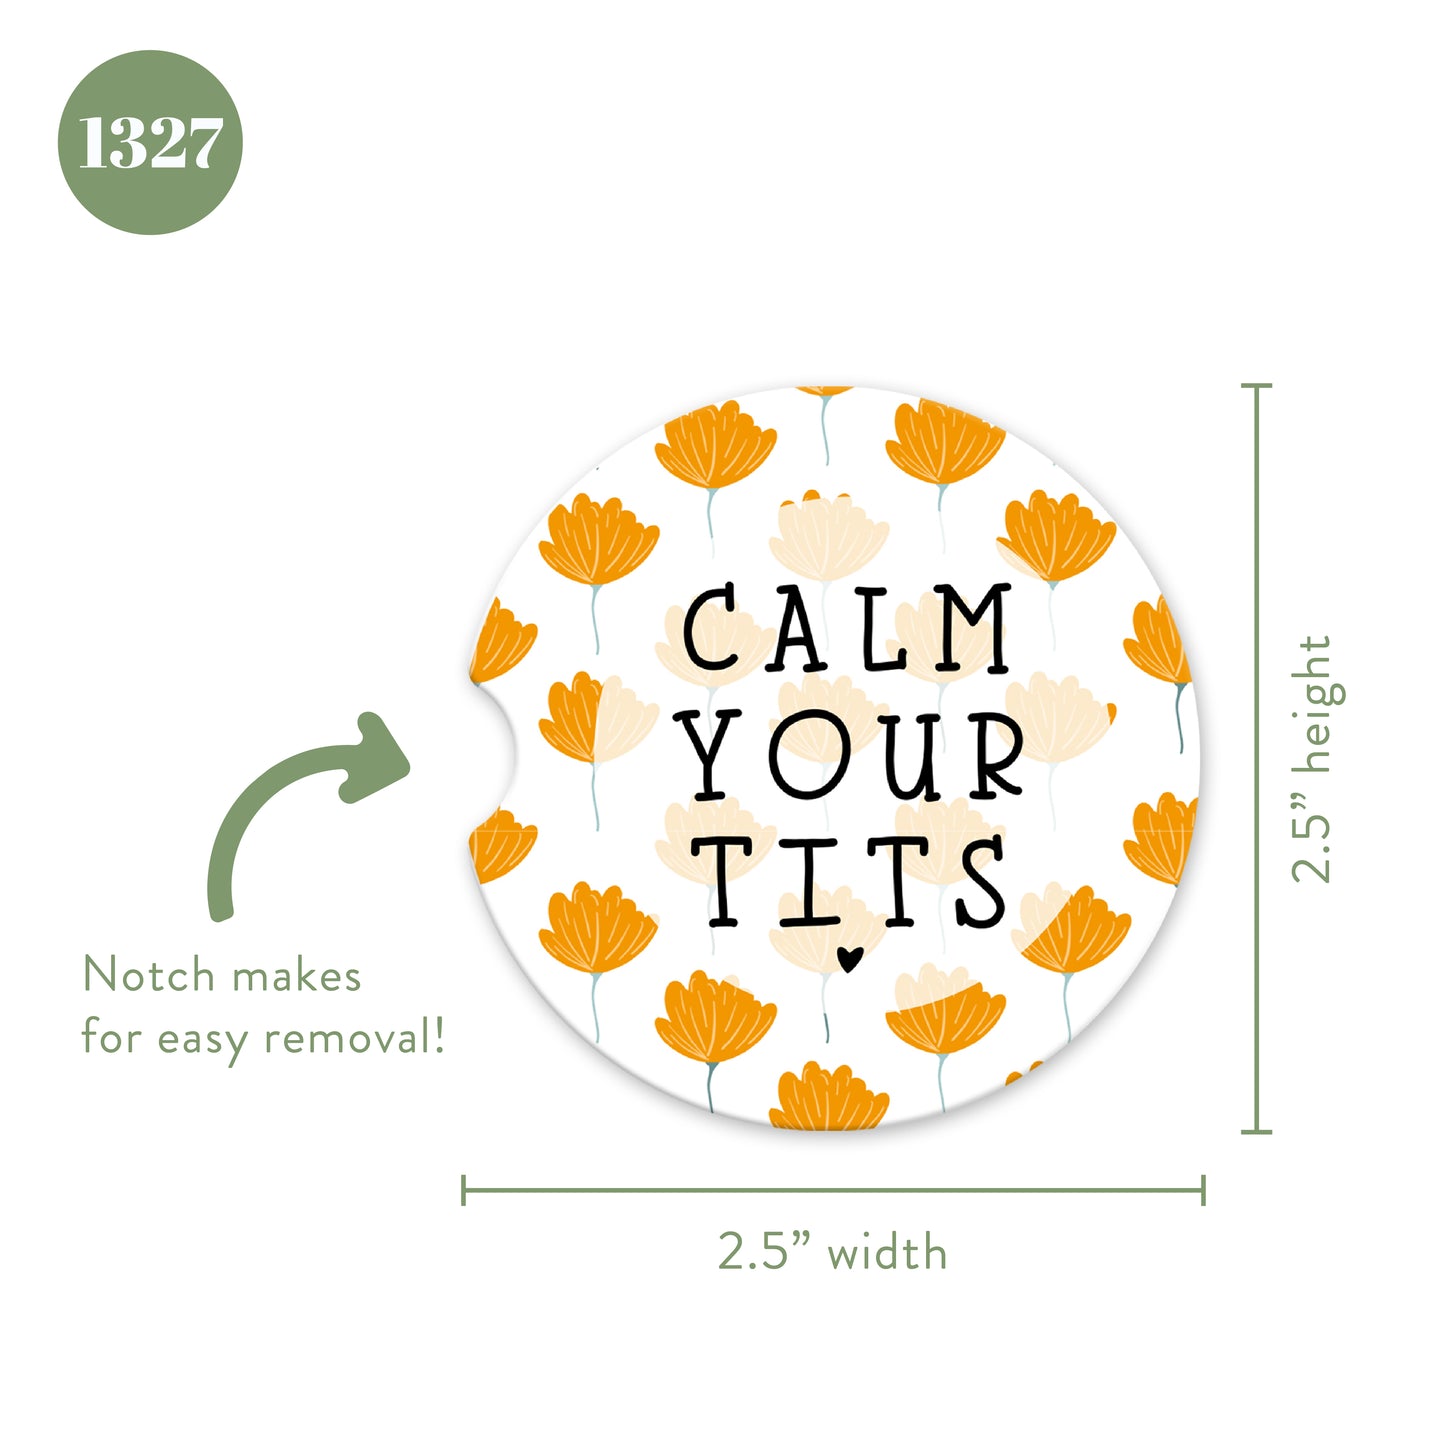 Calm Your Tits Sandstone Car Coasters (Set of 2)